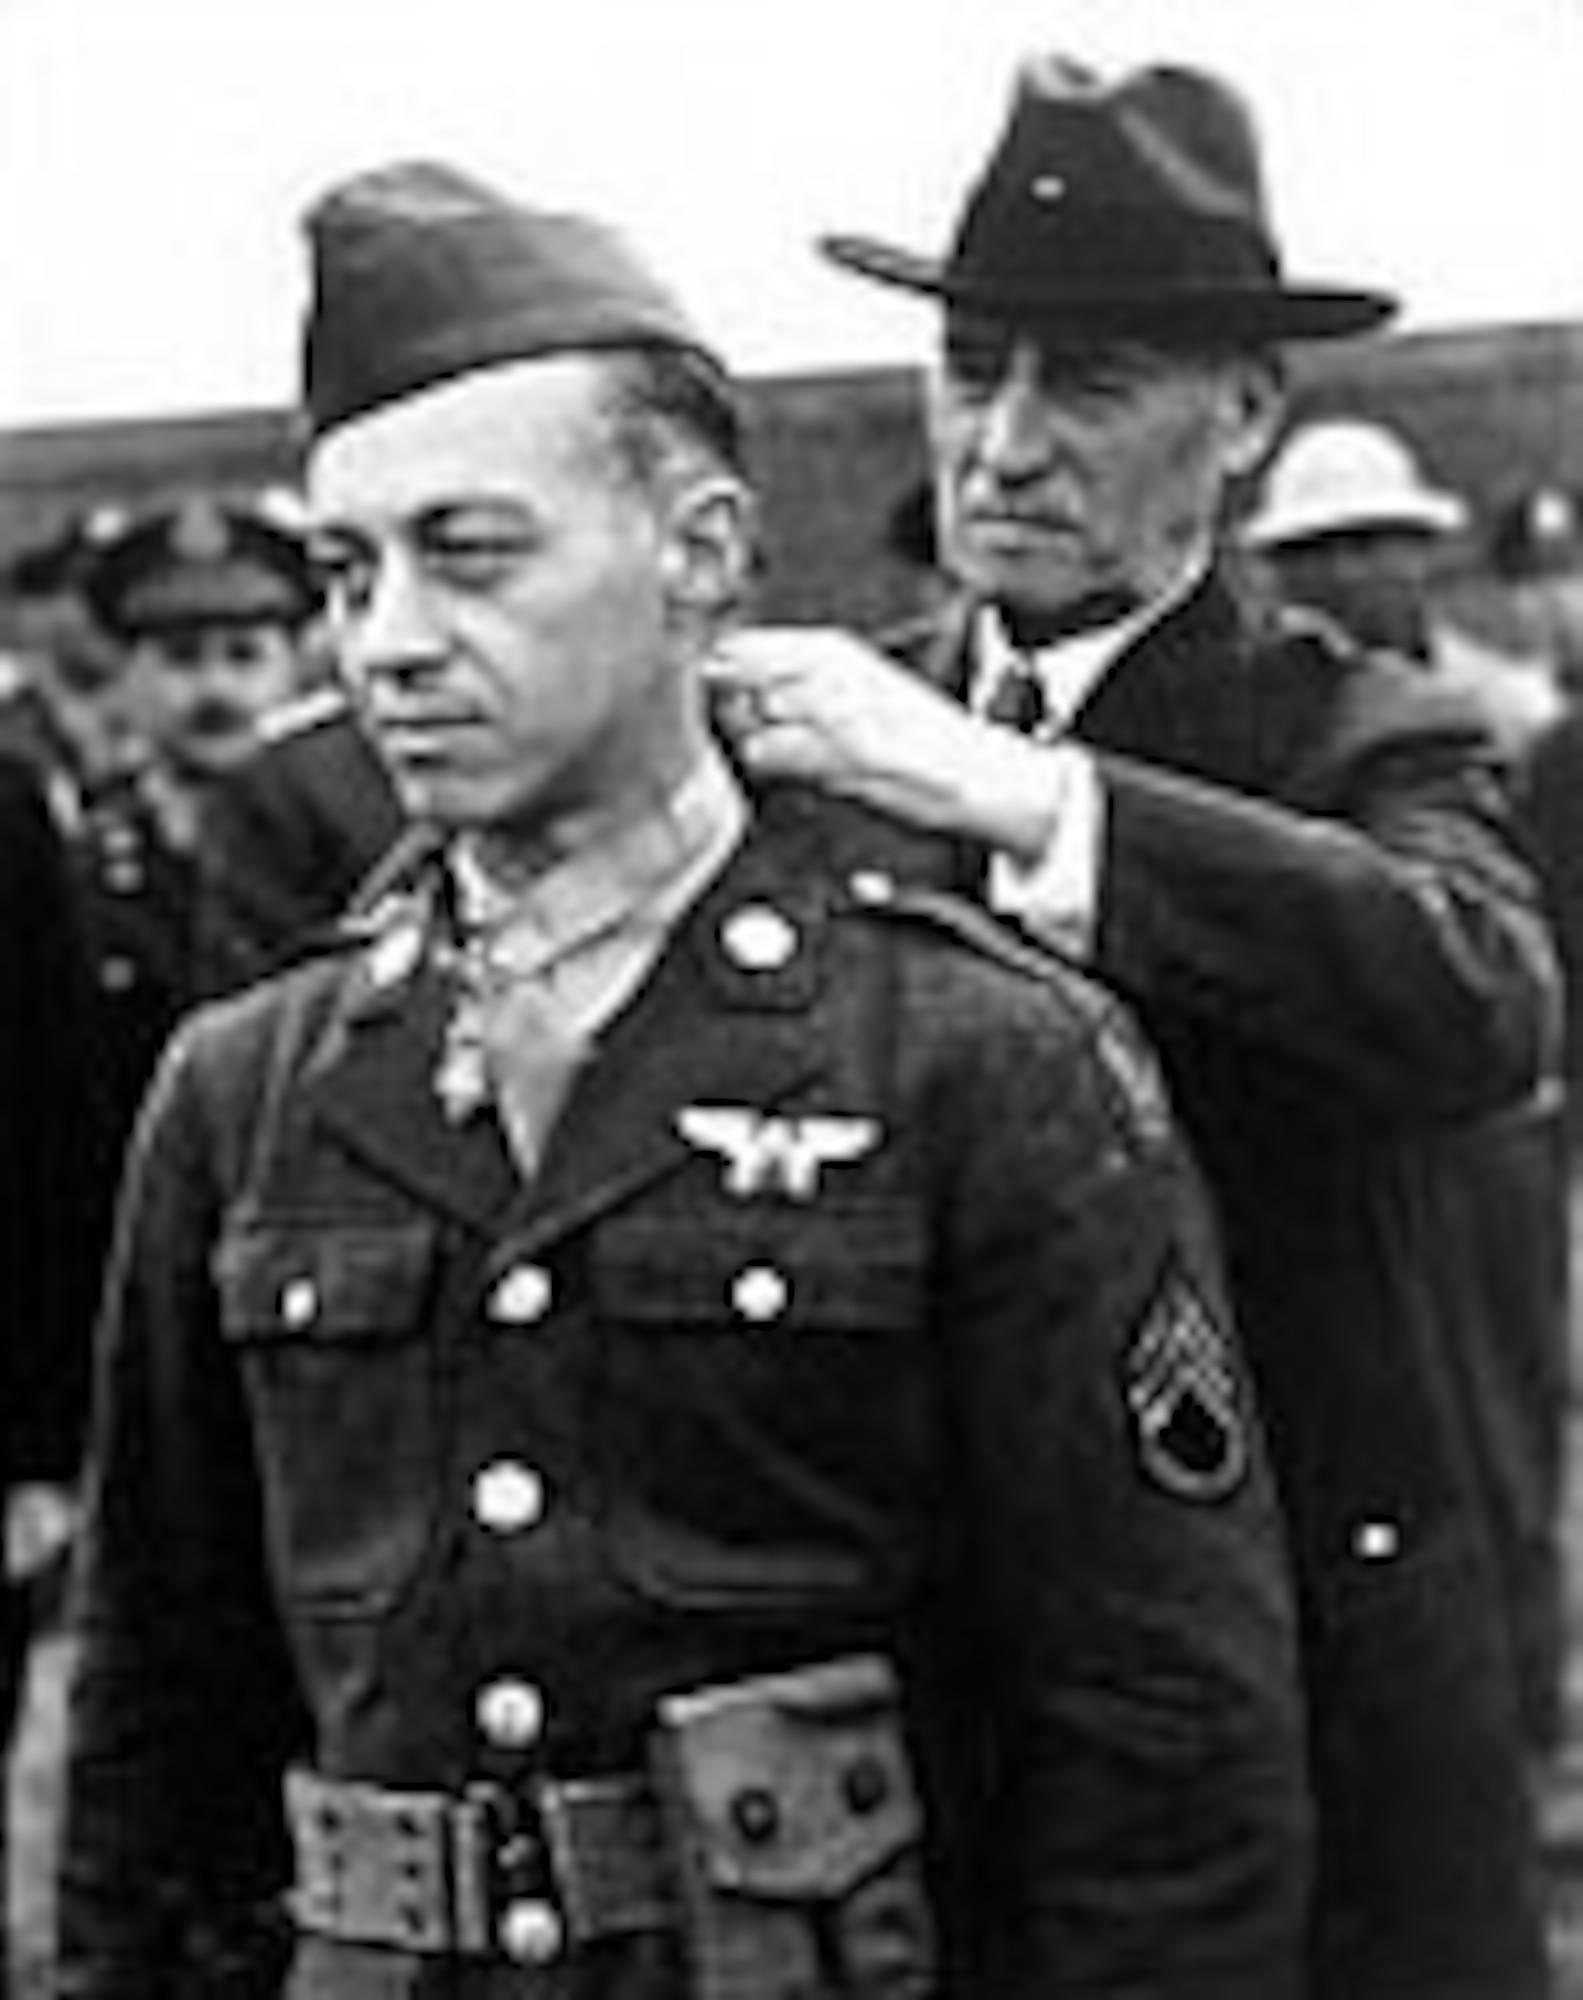 SSgt. Maynard H. Smith receives the Medal of Honor. (U.S. Air Force photo)